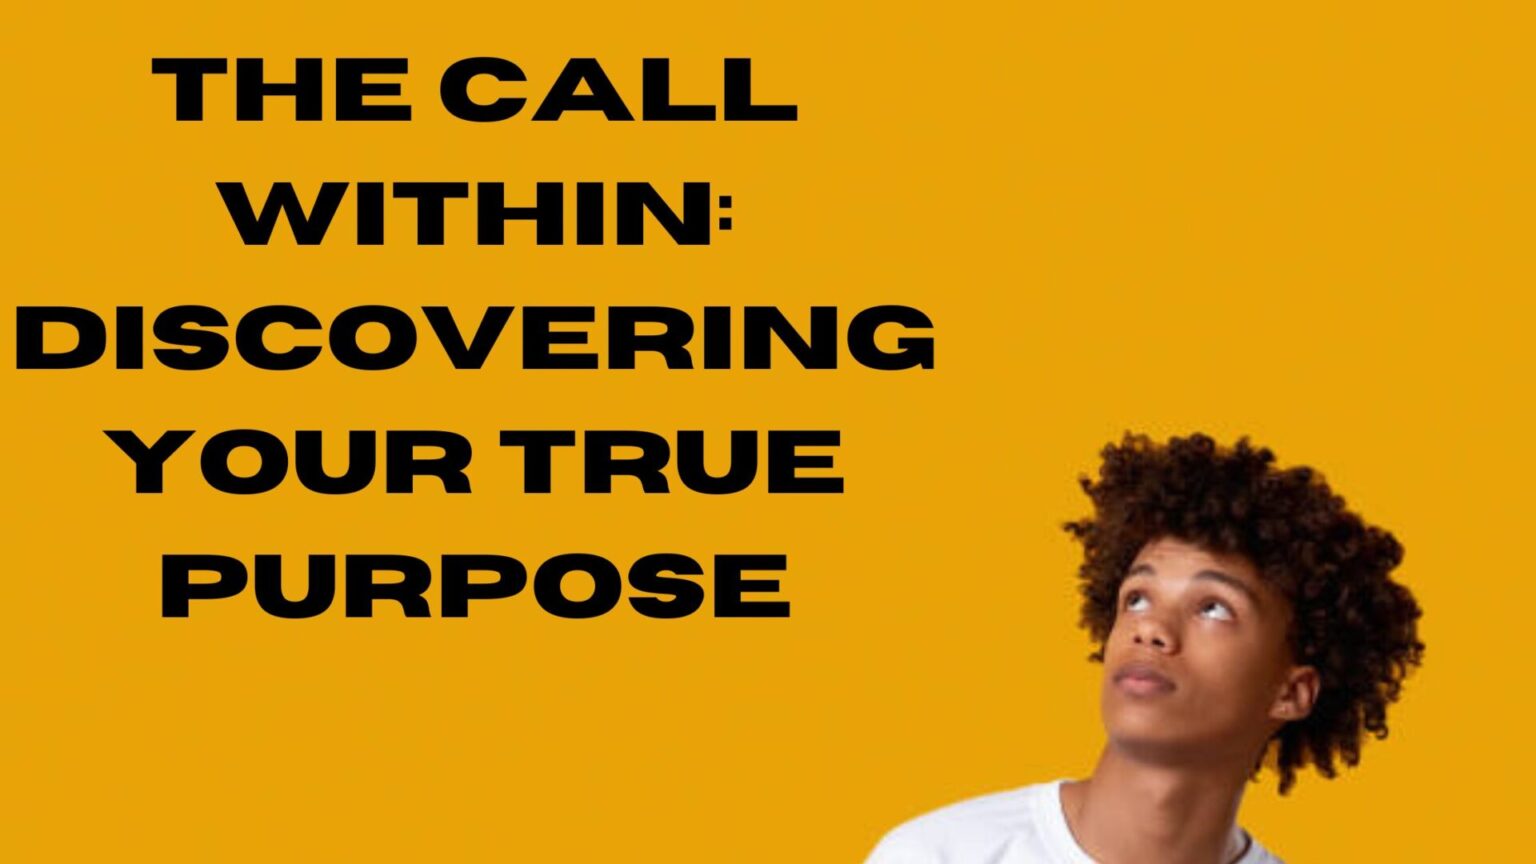 The Call Within: Discovering Your True Purpose